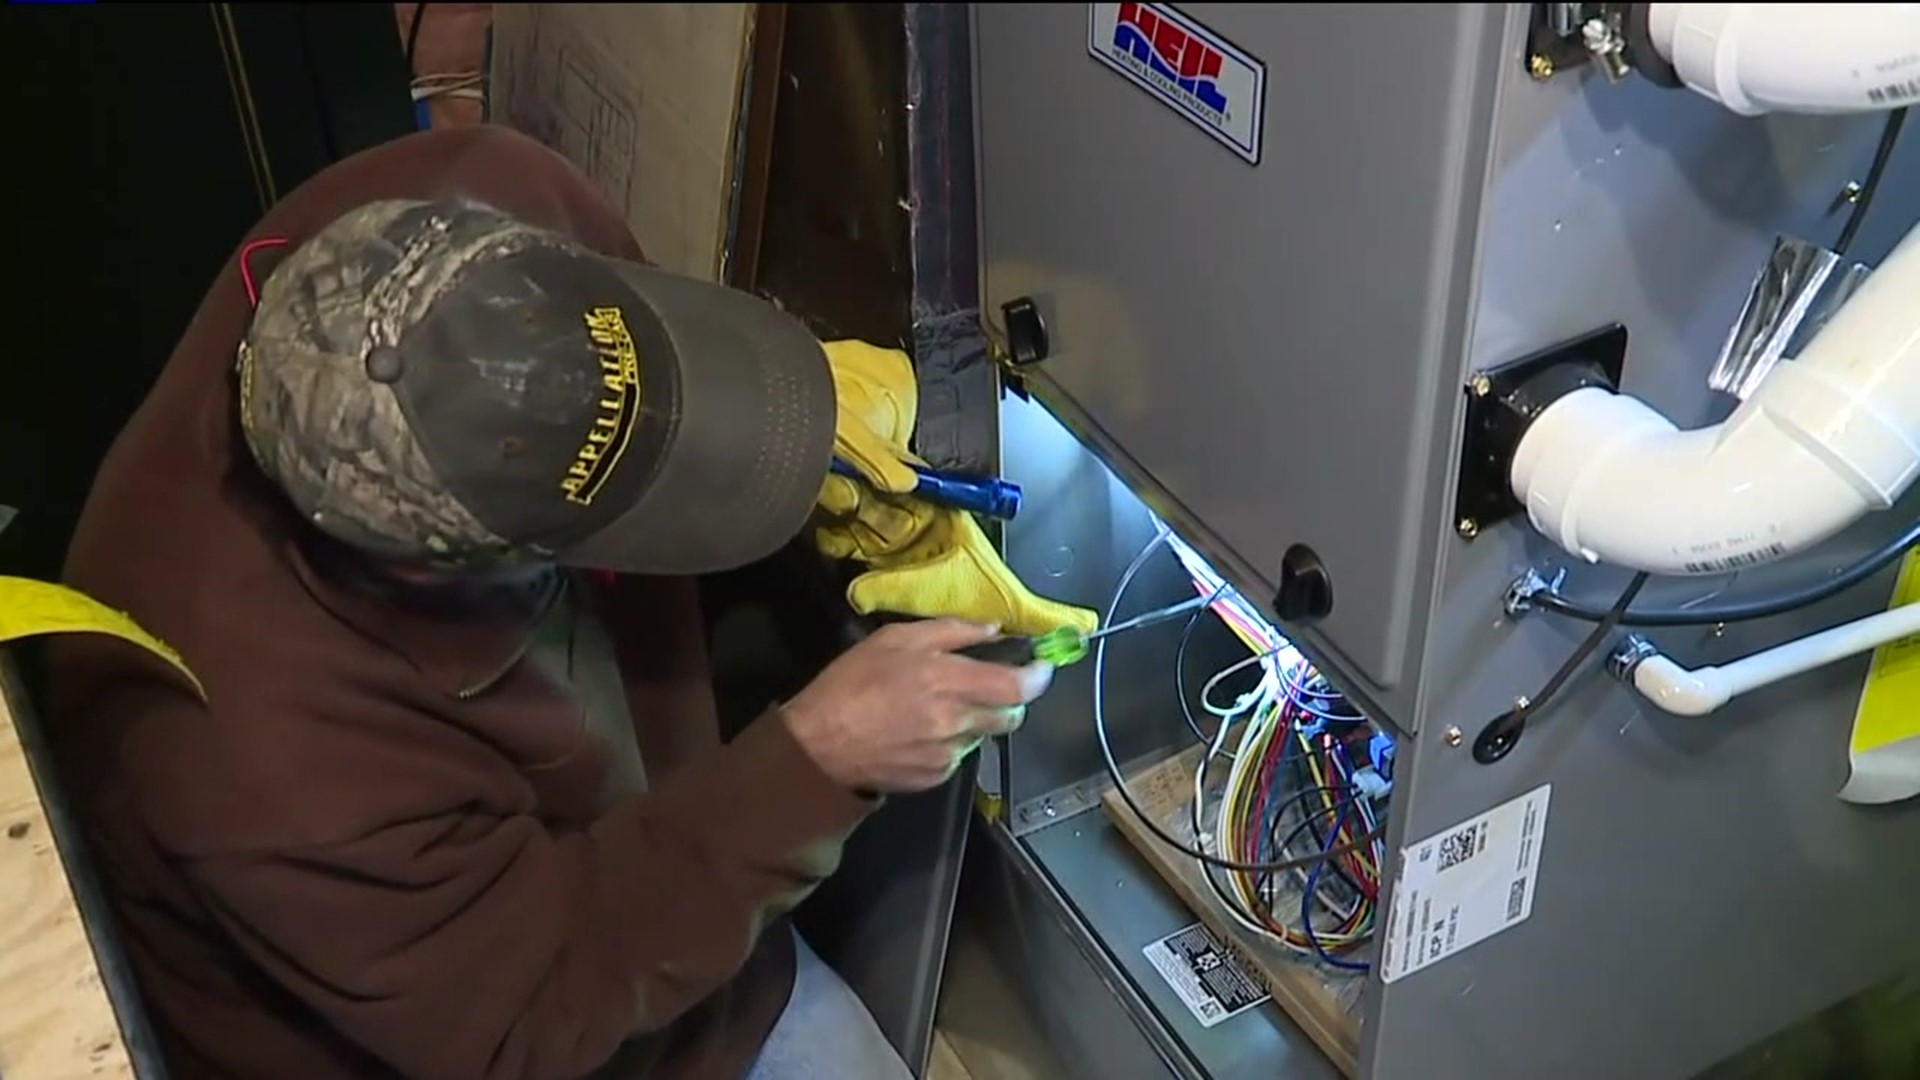 Wayne County officials say there's a lack of contractors to repair heating systems of those who receive assistance and could mean big trouble when problems occur